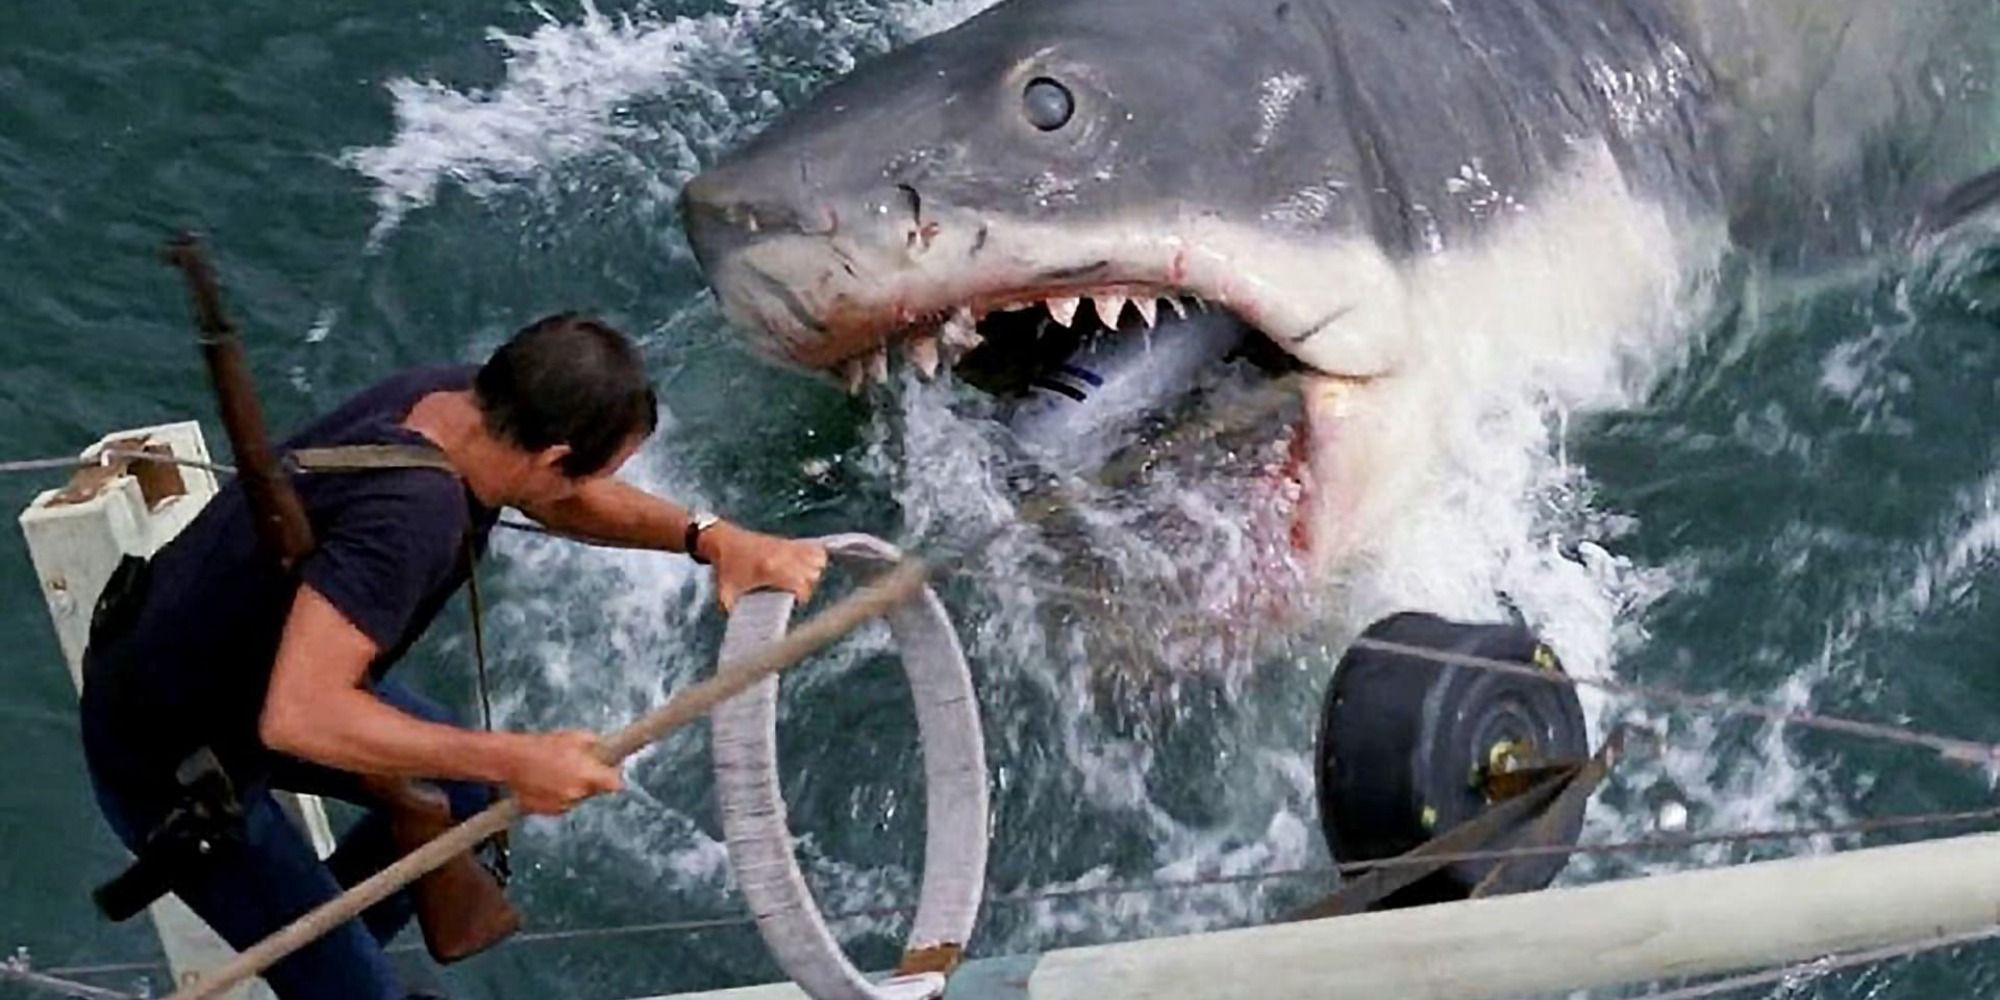 A screenshot of Chief Martin Brody fending off the great white shark in Jaws